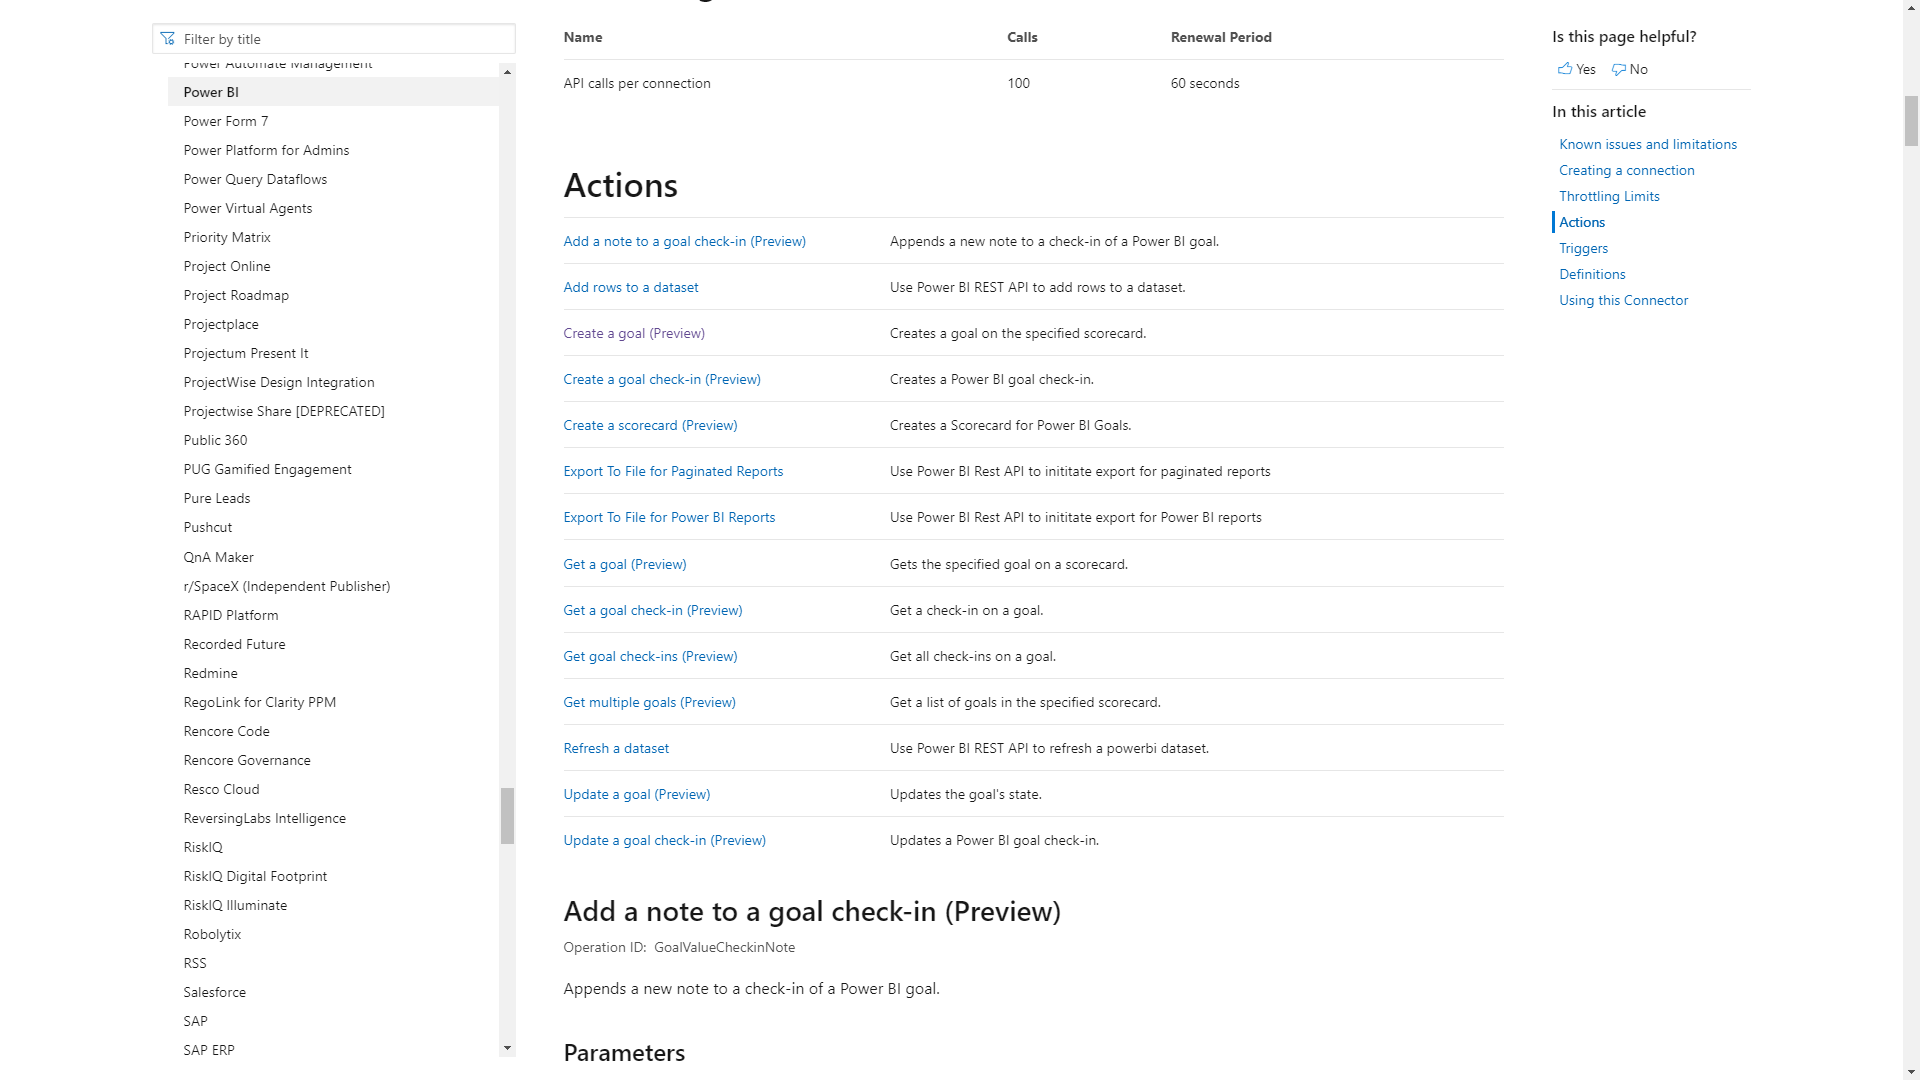 Screenshot of A snapshot of the documentation screen for each action and trigger.